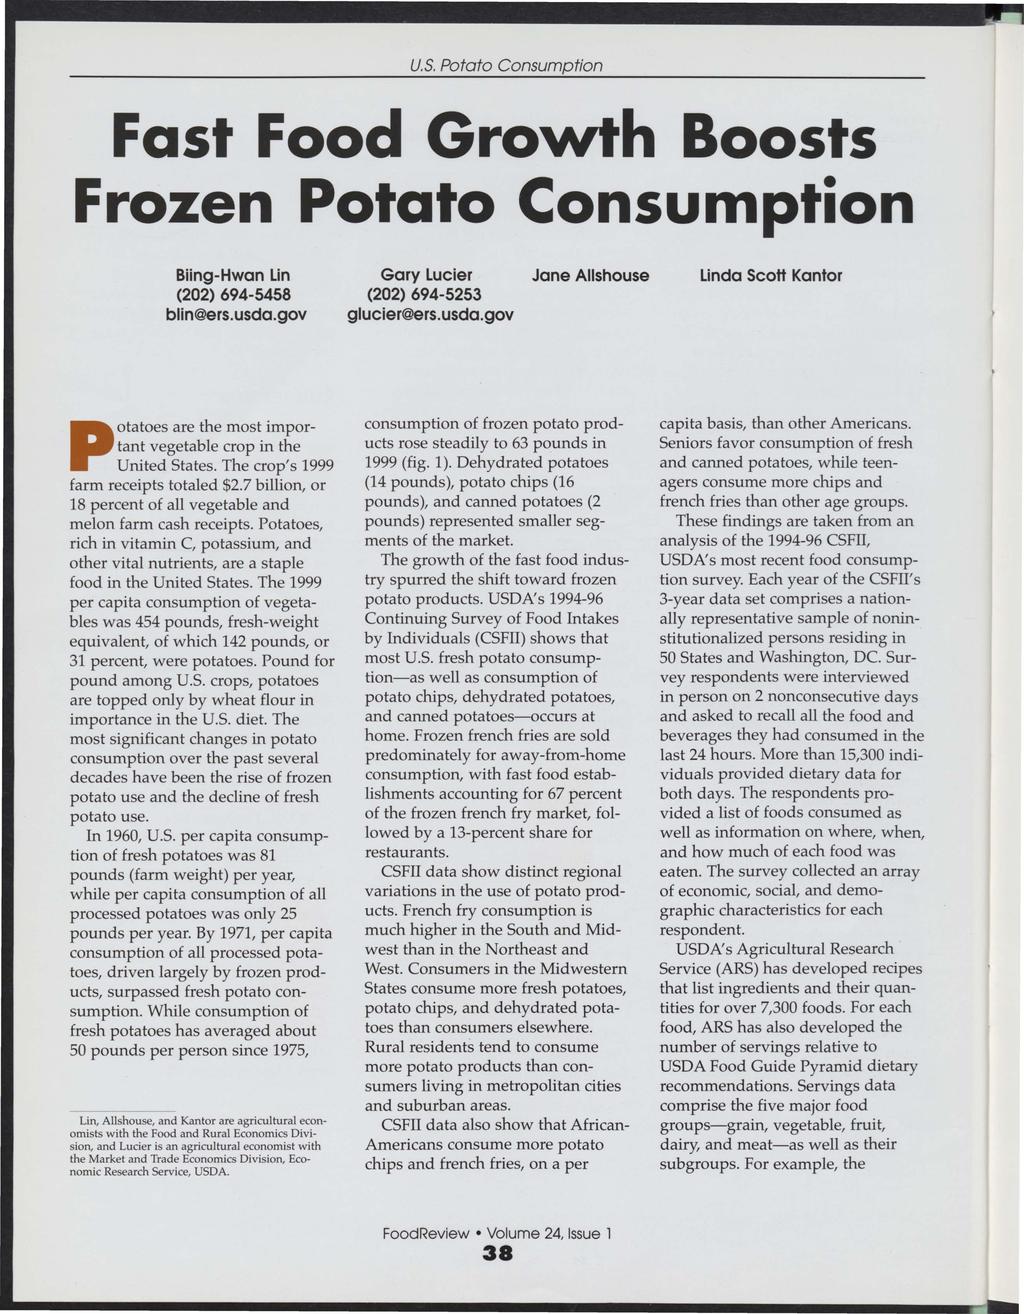 Fast Food Growth Boosts Frozen Potato Consumption Biing-Hwan Lin (2) 694-5458 blin@ers.usda.gov Gary Lucier (2) 694-5253 glucier@ers.usda.gov Jane Allshouse Linda Scott Kantor Potatoes are the most important vegetable crop in the United States.